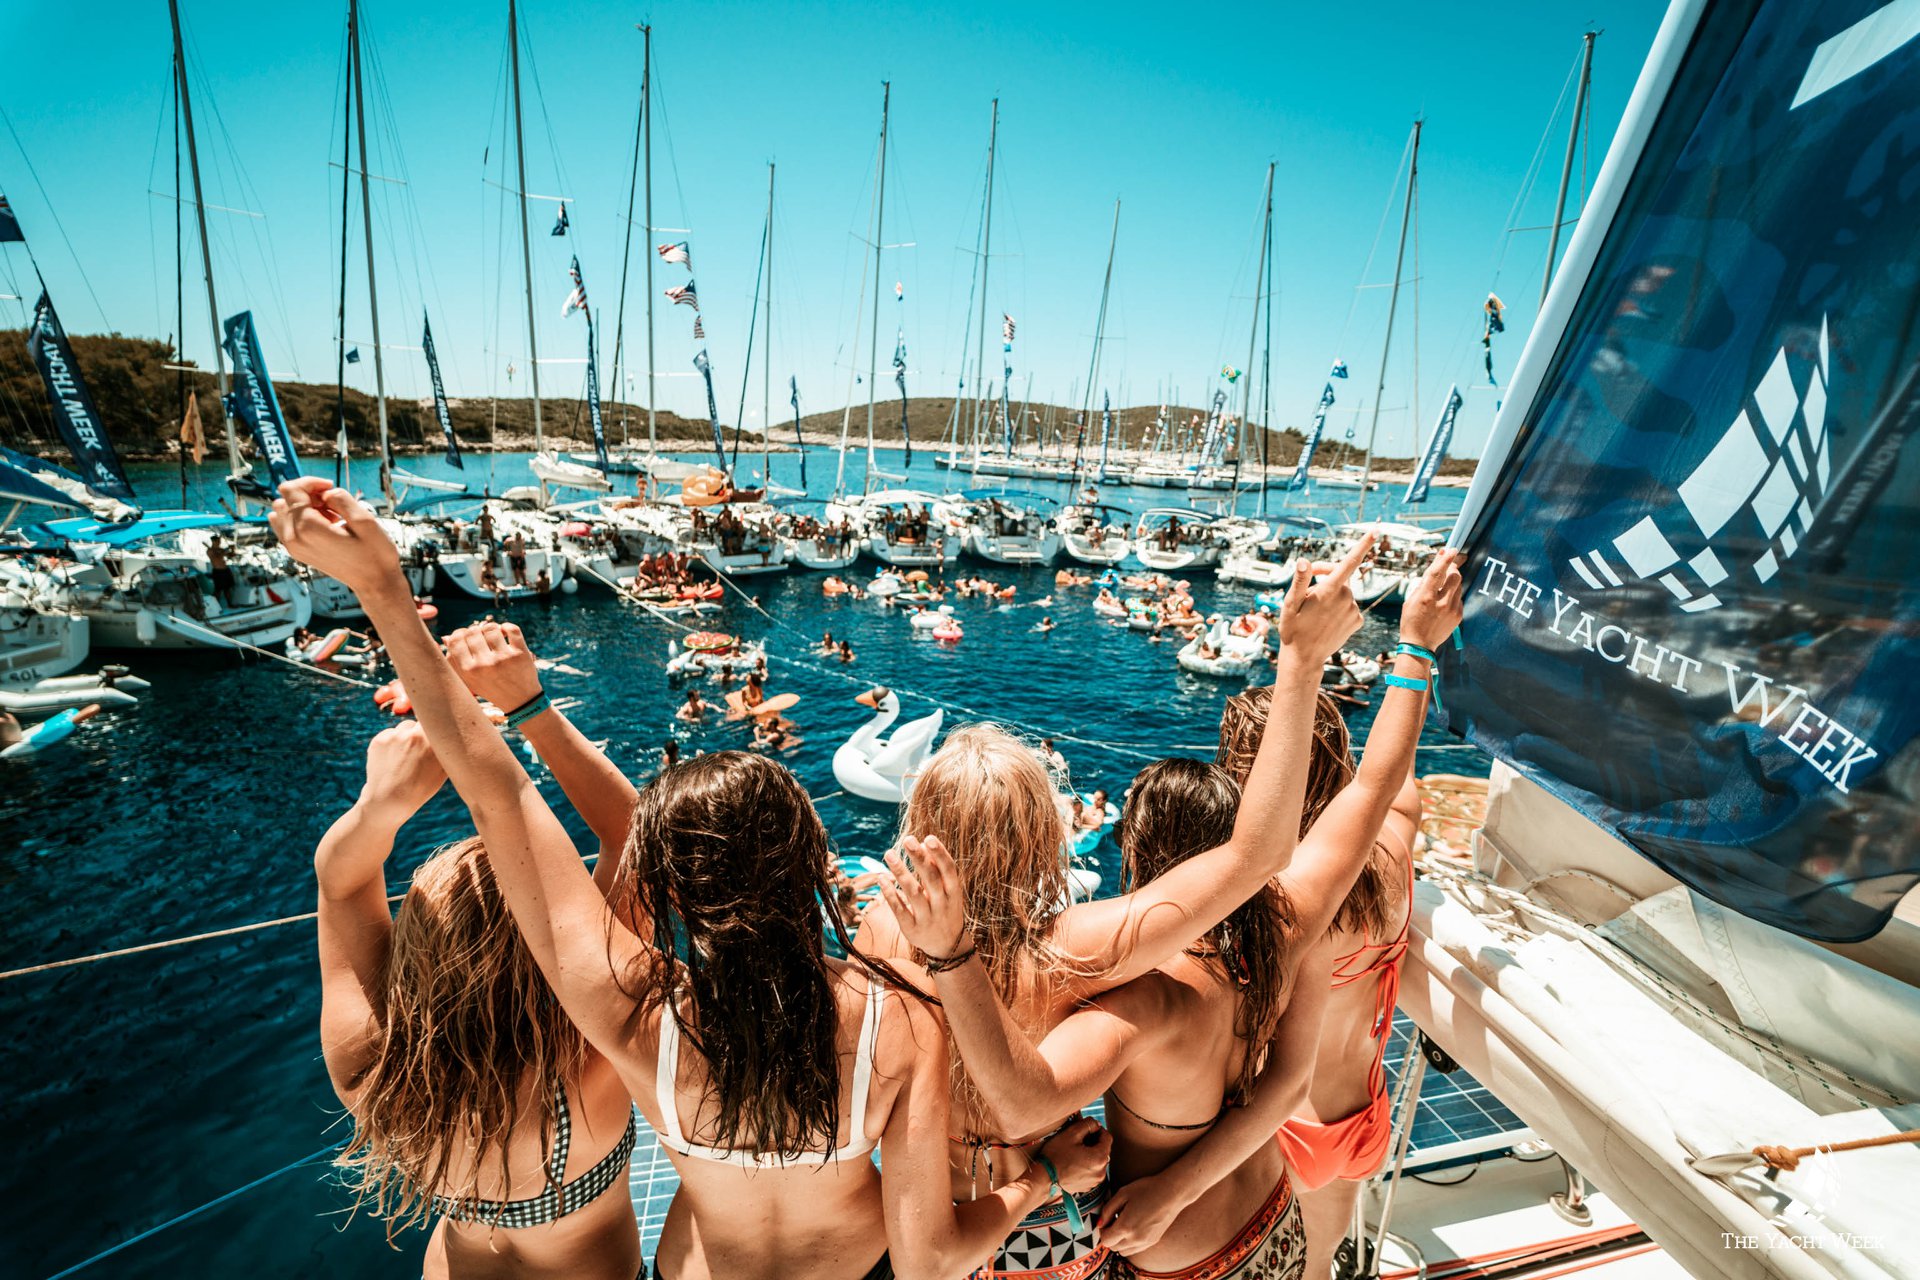 services at gta yacht rental